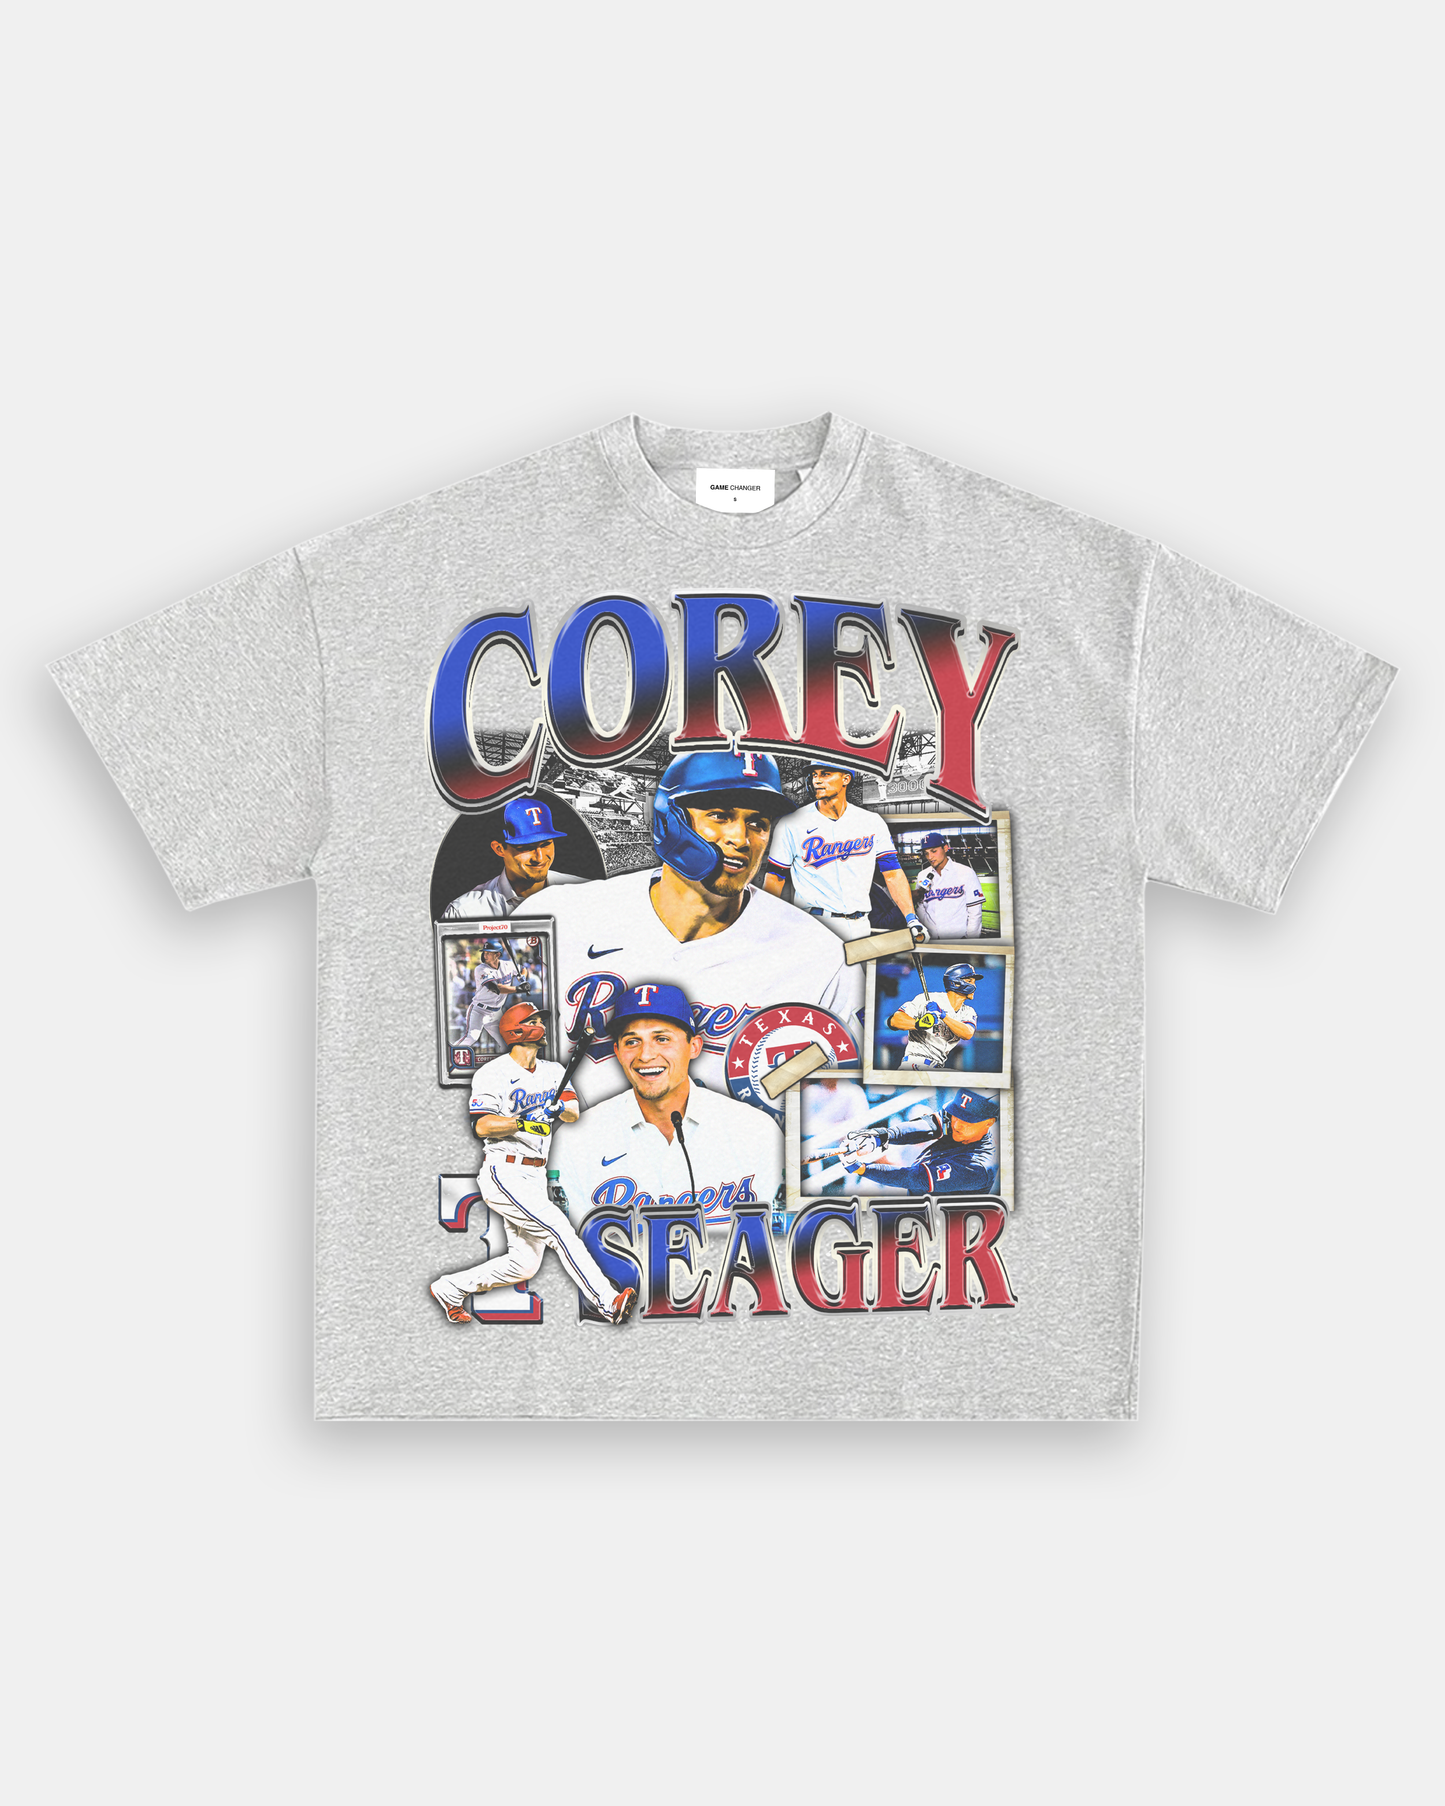 COREY SEAGER TEE – GAME CHANGERS